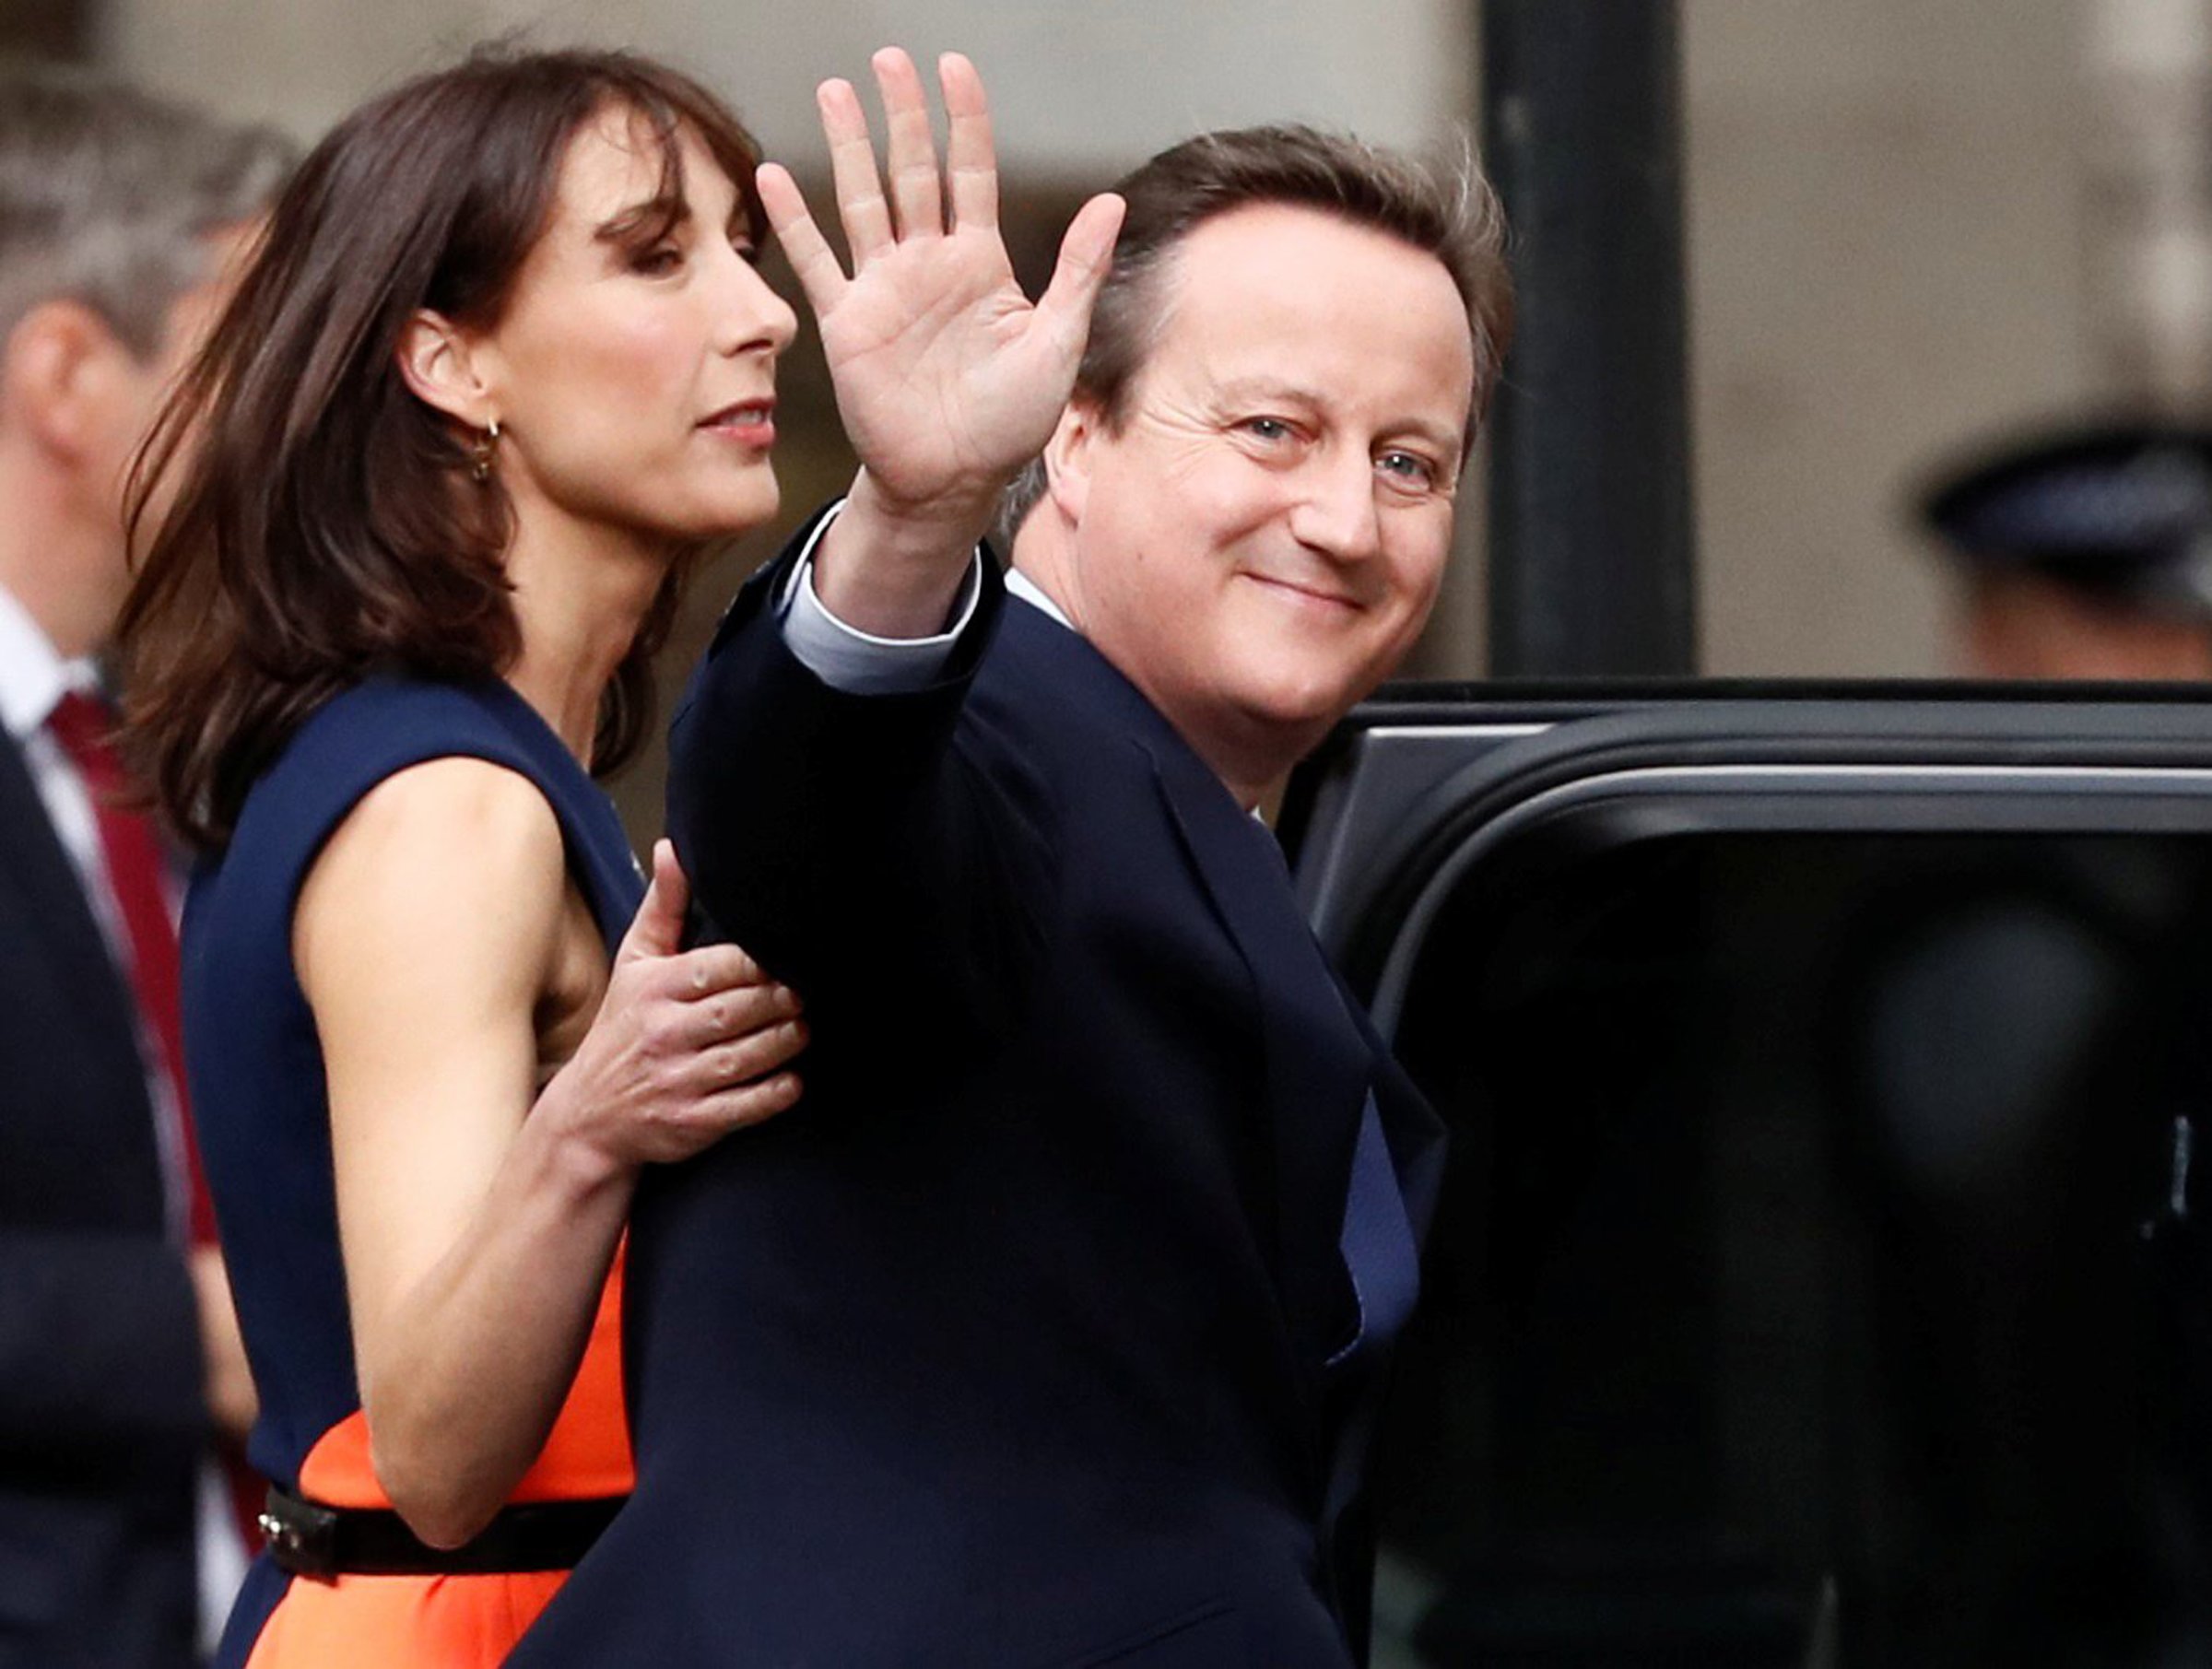 Britain's outgoing Prime Minister, David Cameron with his wife Samantha, waves in front of number 10 Downing Street, on his last day in office as Prime Minister, in central London, on July 13, 2016.